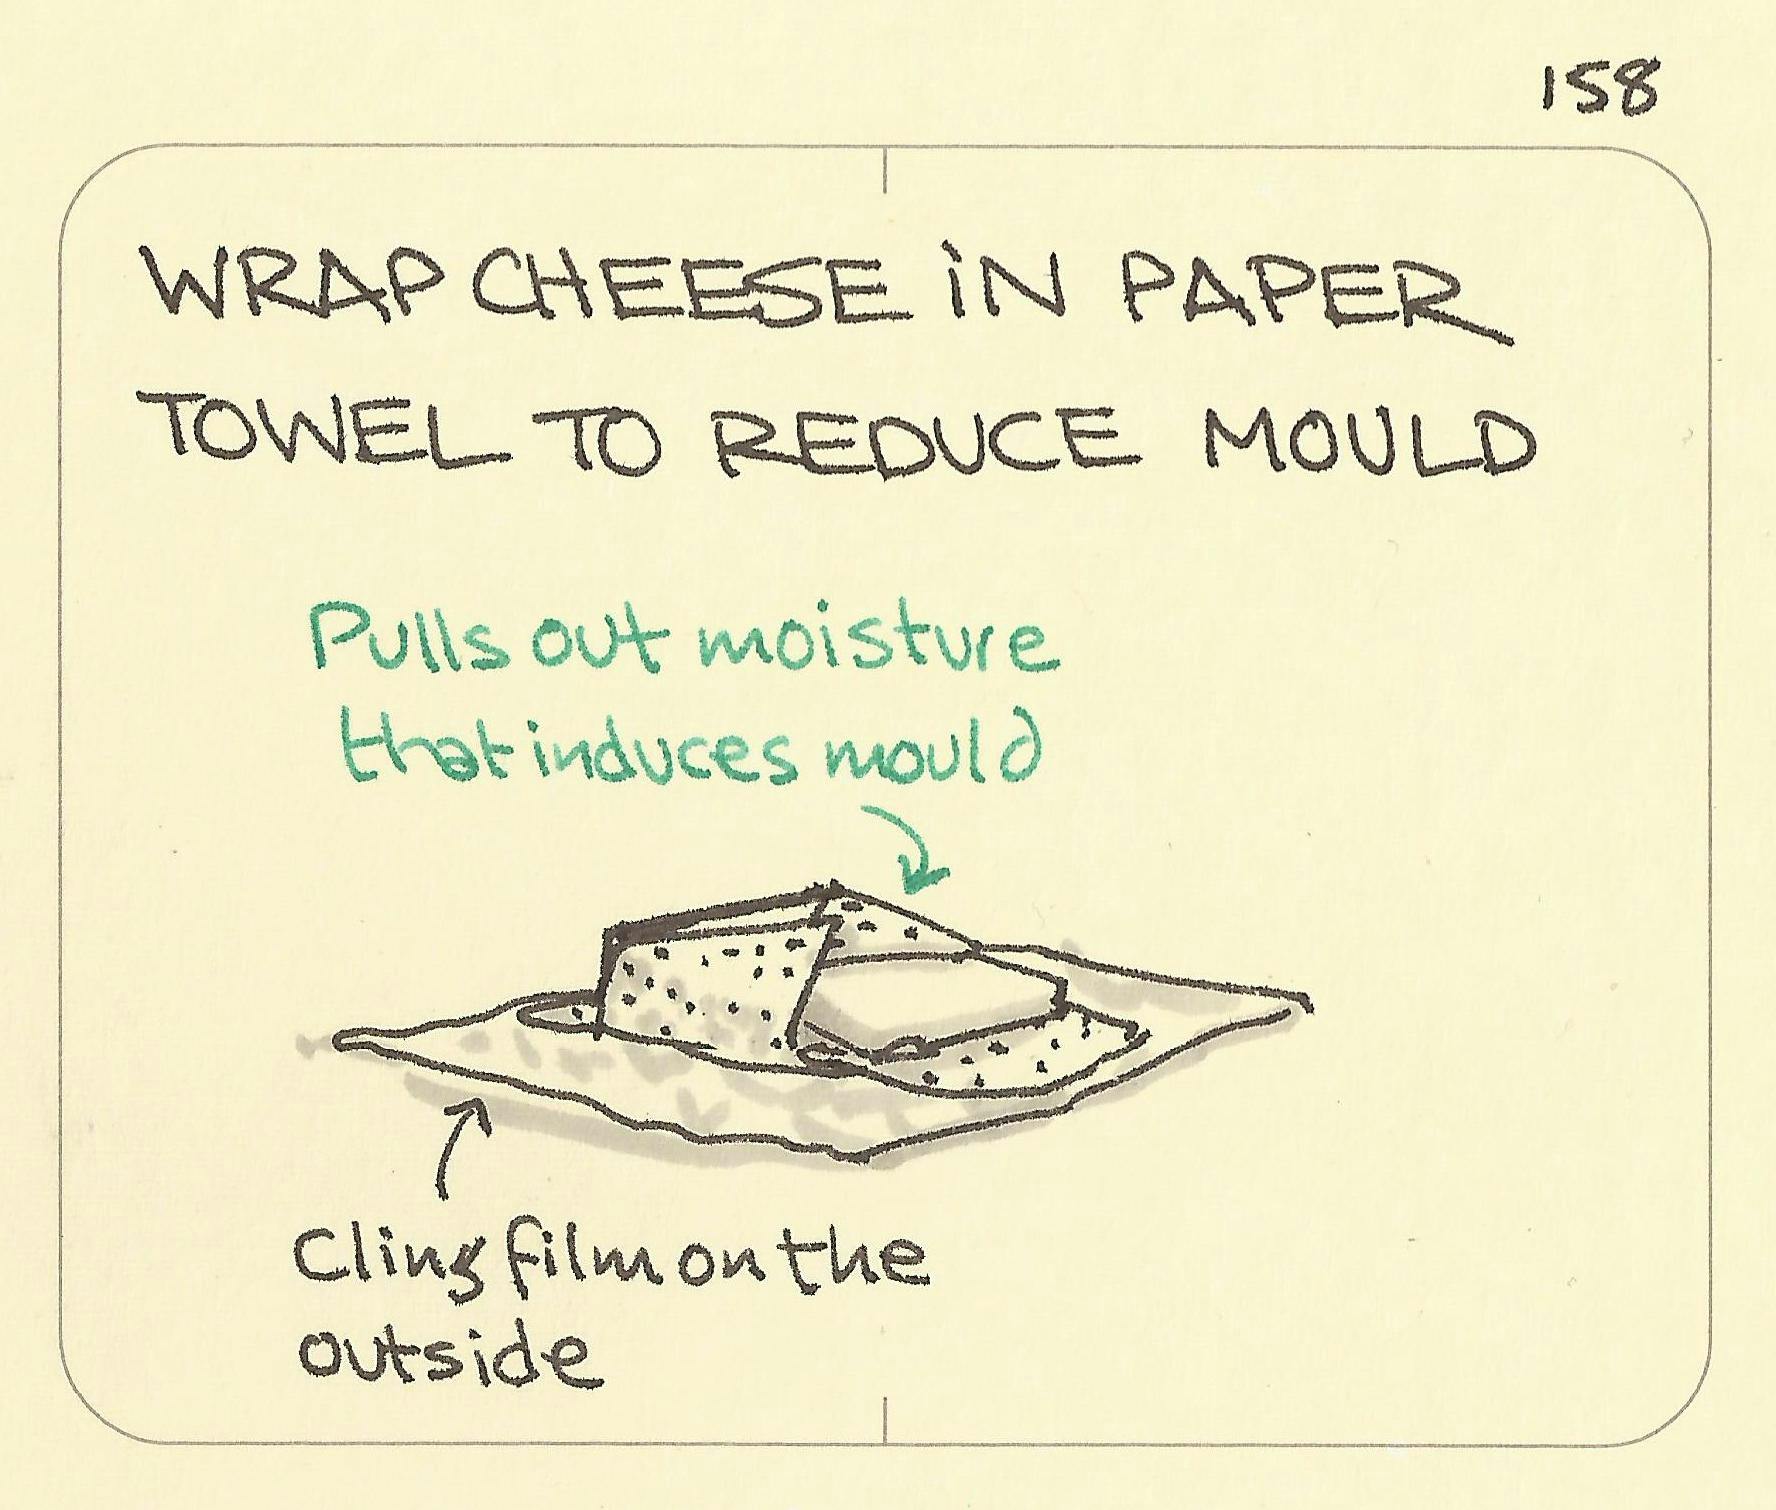 Wrap cheese in paper towel to reduce mould - Sketchplanations